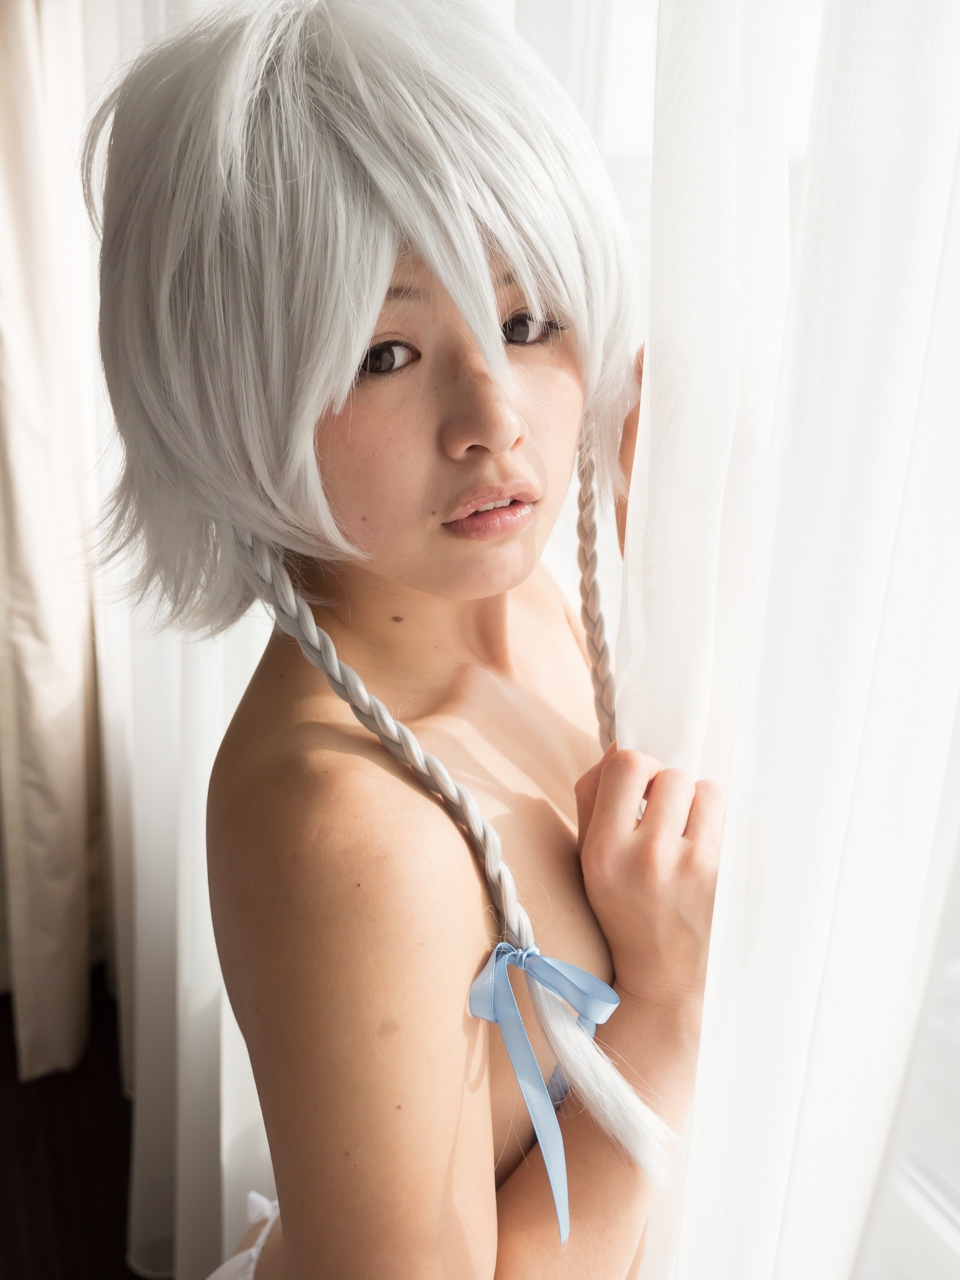 [Sakaki Cosplay Mistress] Sakaki Cosplay Mistress DL 001 (Touhou Project) 55